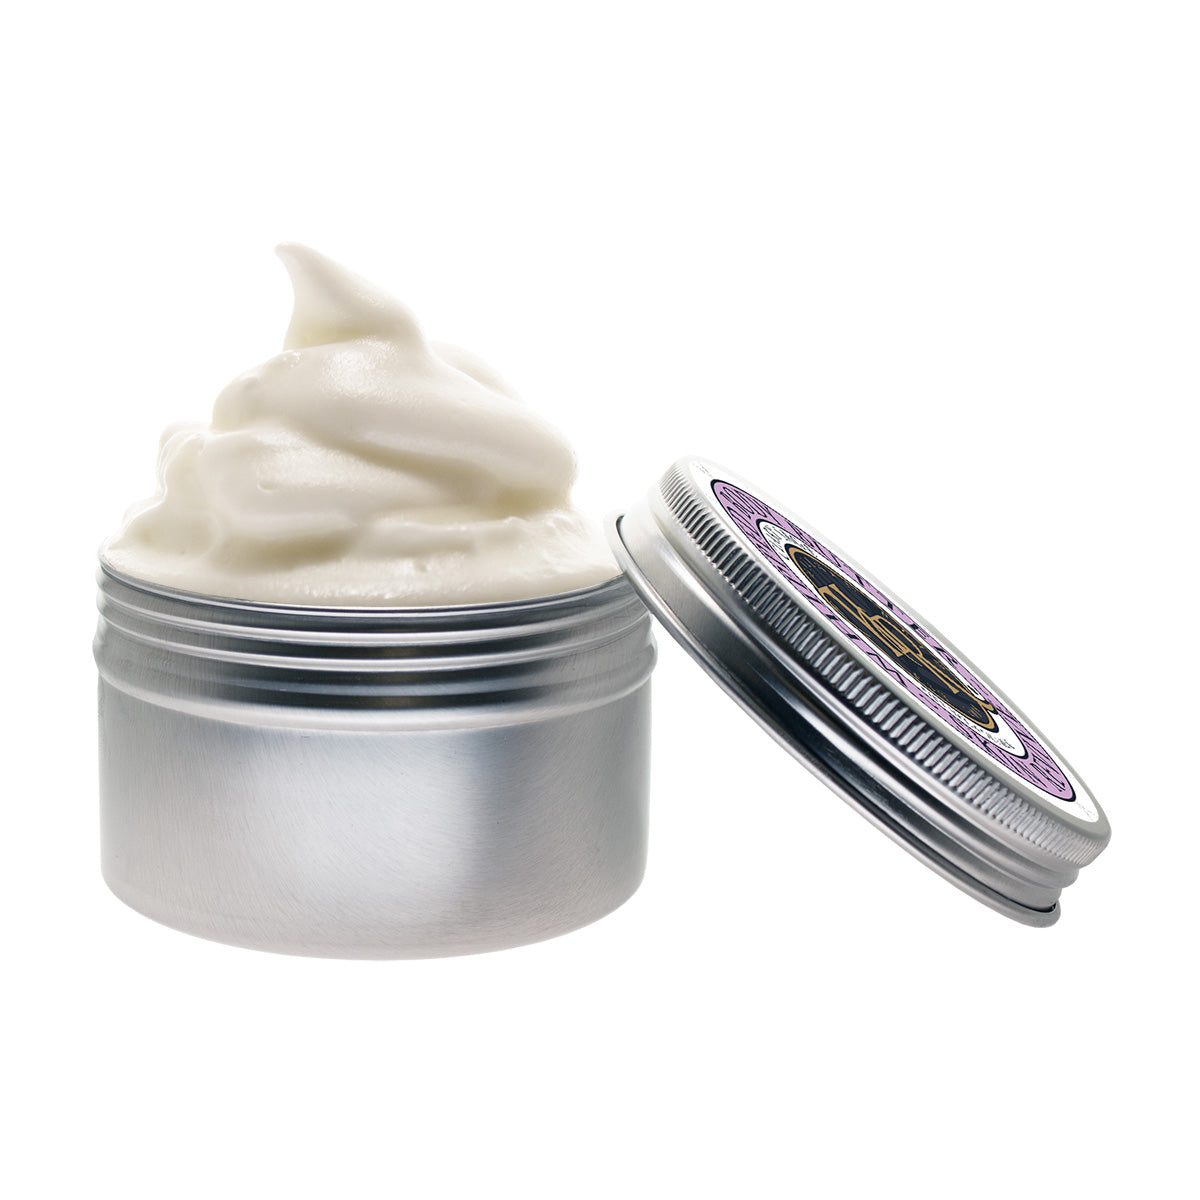 Clary Sage Whipped Body Butter Skin Care Body Skin Care